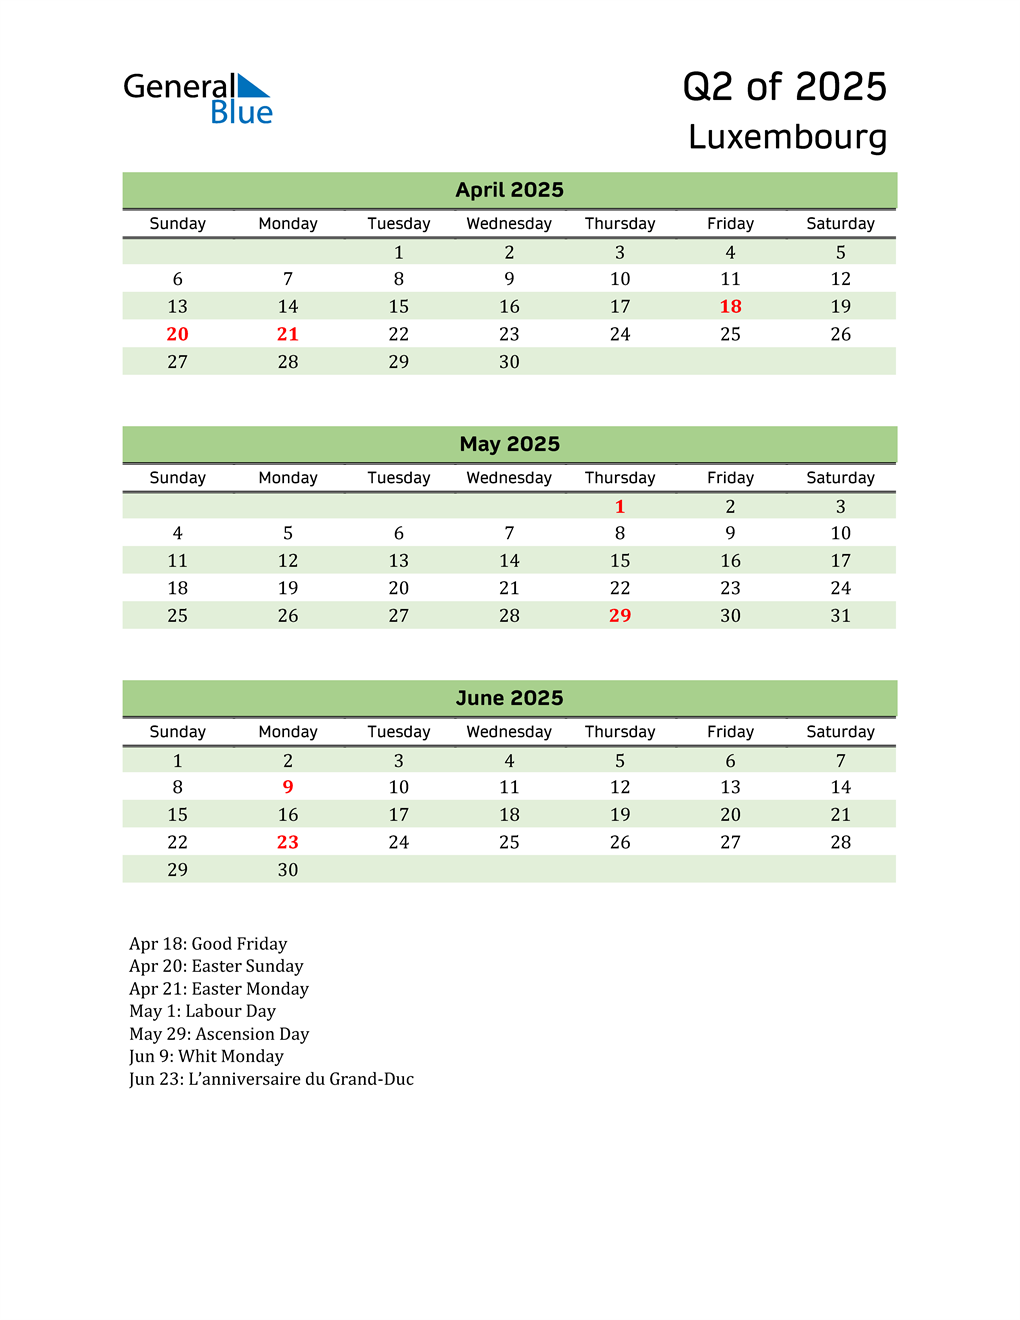  Quarterly Calendar 2025 with Luxembourg Holidays 